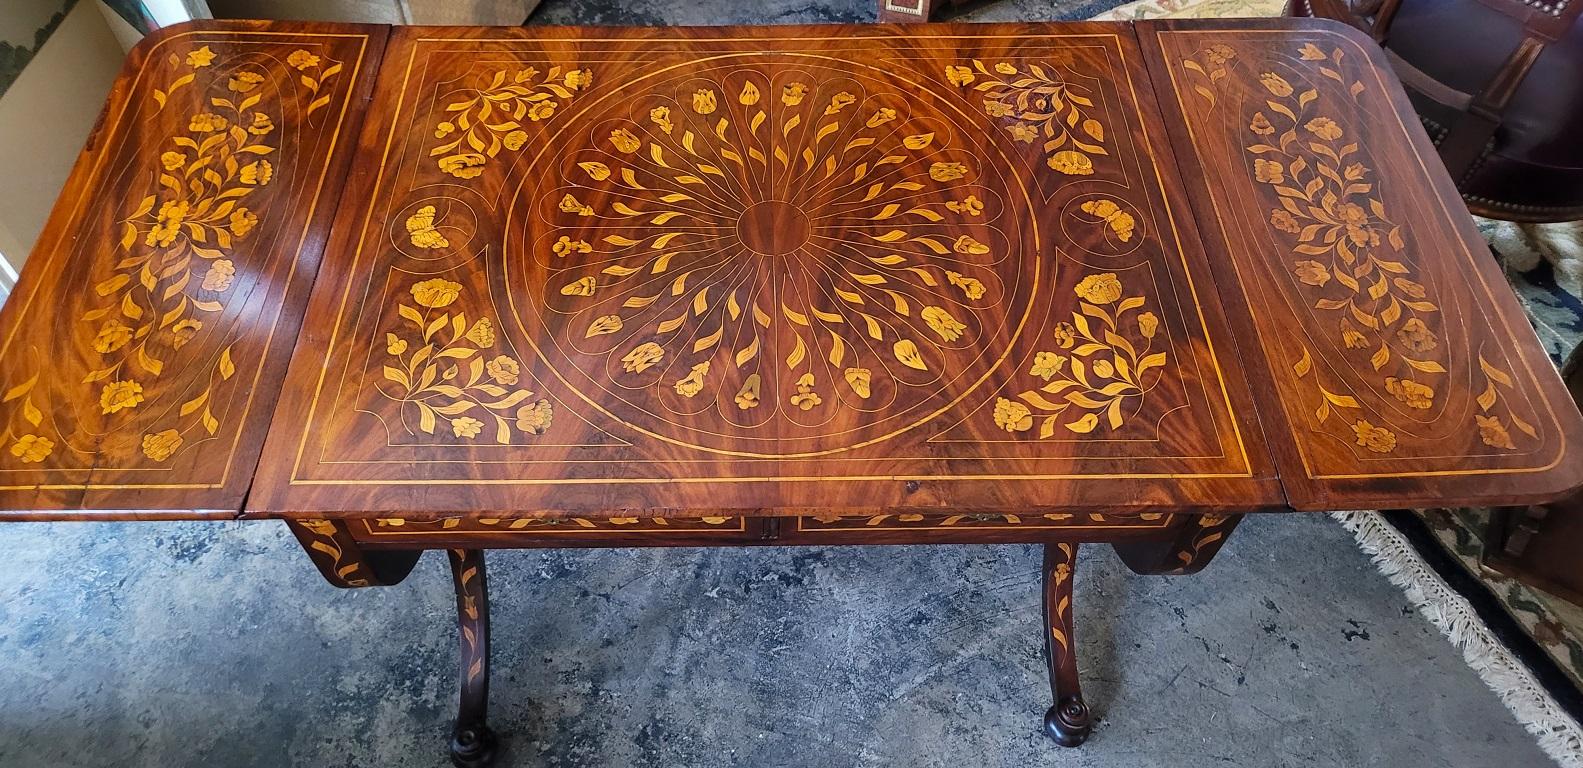 Exceptional 18C Dutch Regency Marquetry Sofa Table For Sale 5